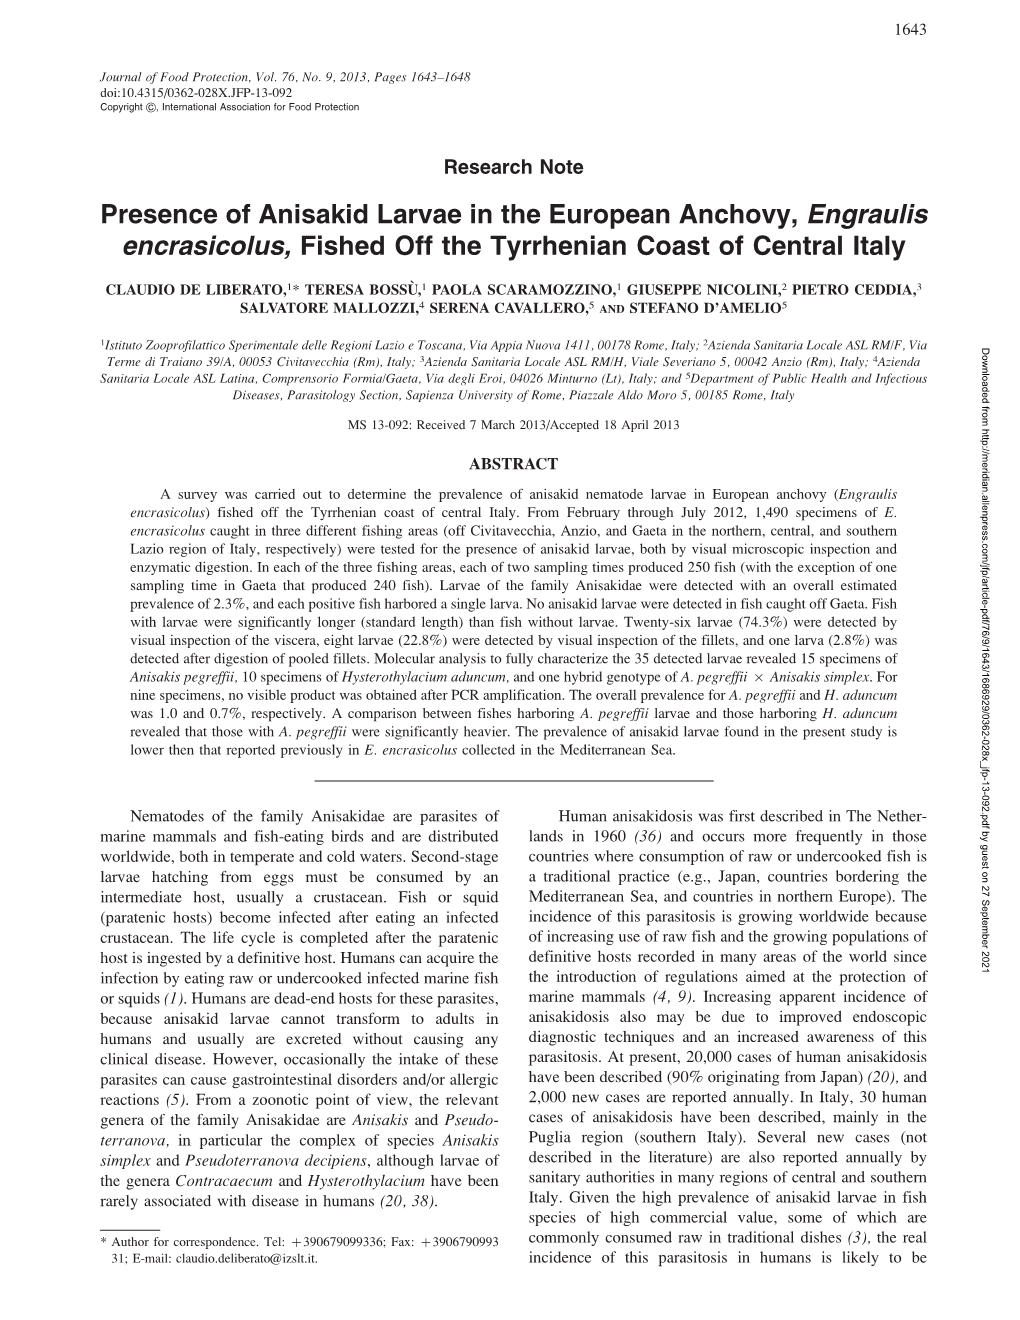 Presence of Anisakid Larvae in the European Anchovy, &lt;I